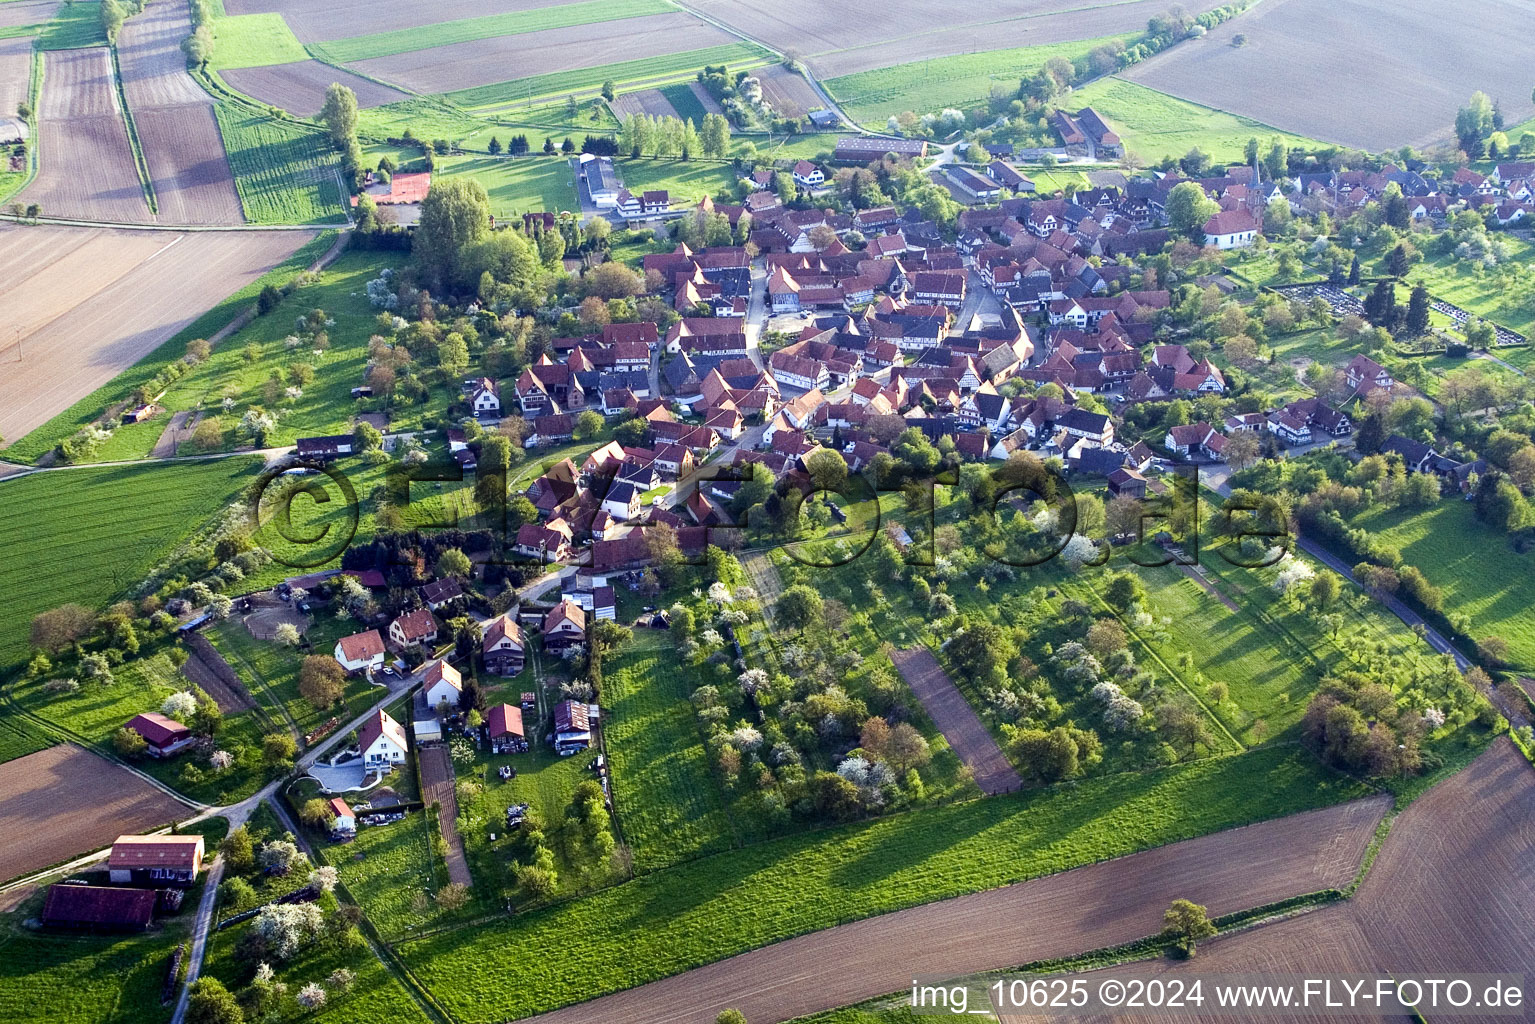 Village - view on the edge of agricultural fields and farmland in Hunspach in Grand Est, France